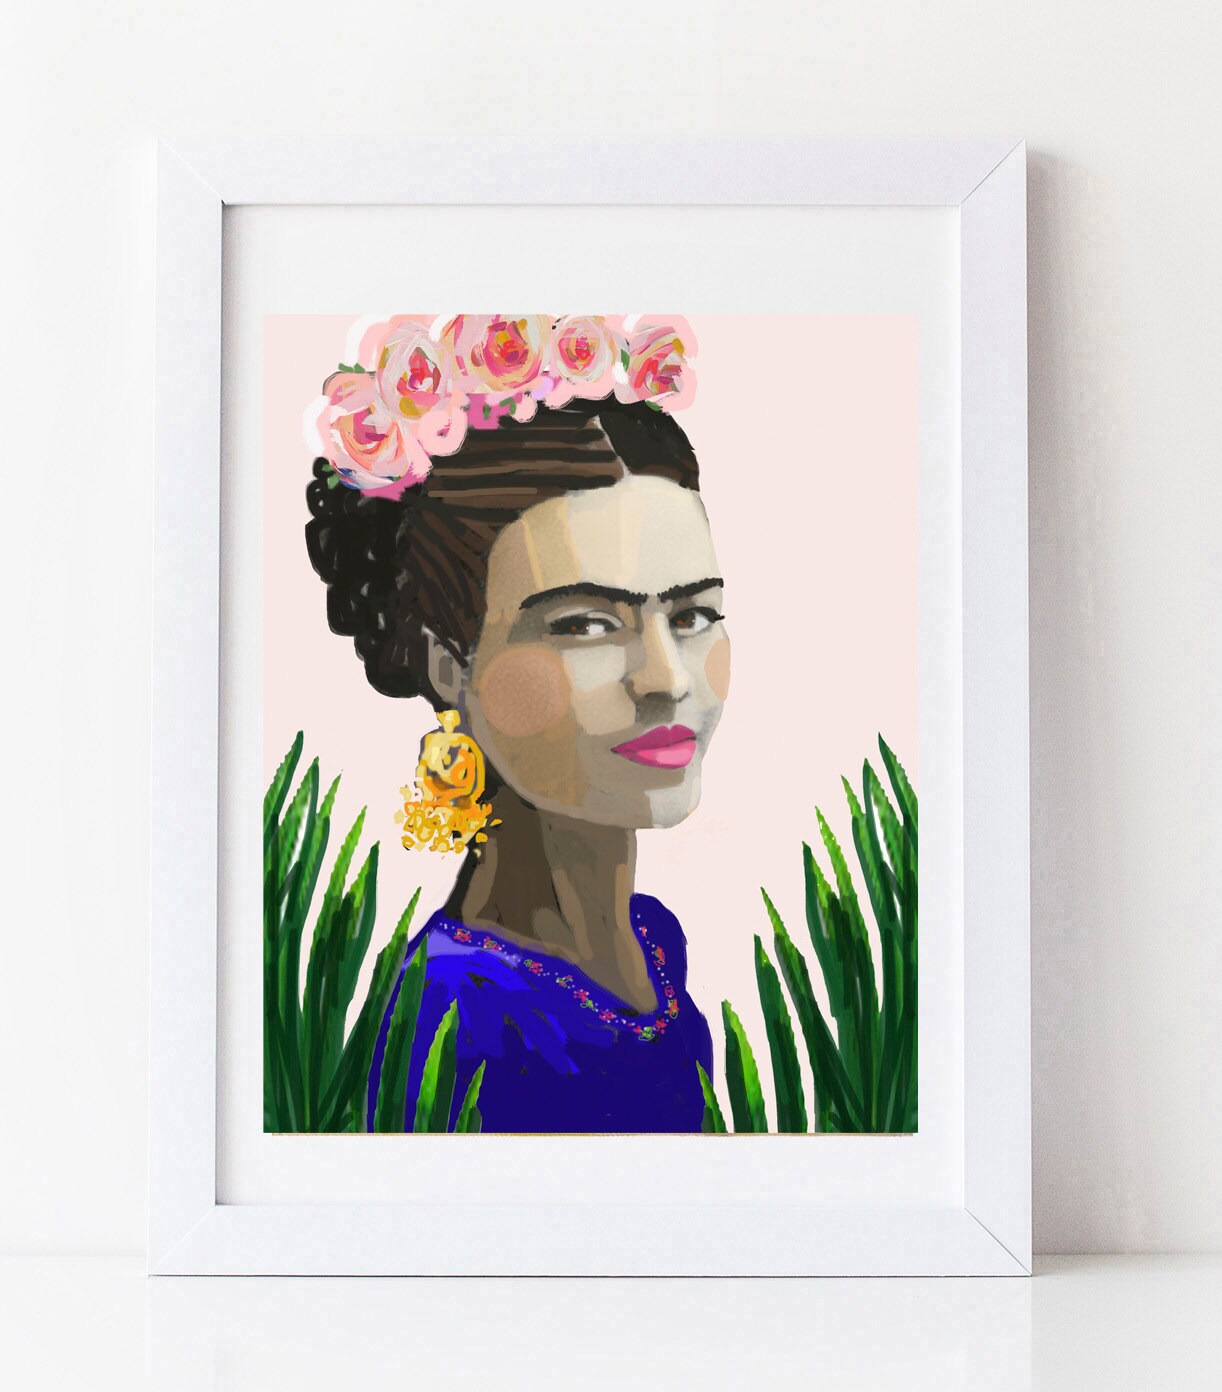 Frida Kahlo Print roses pretty paper or canvas | Etsy